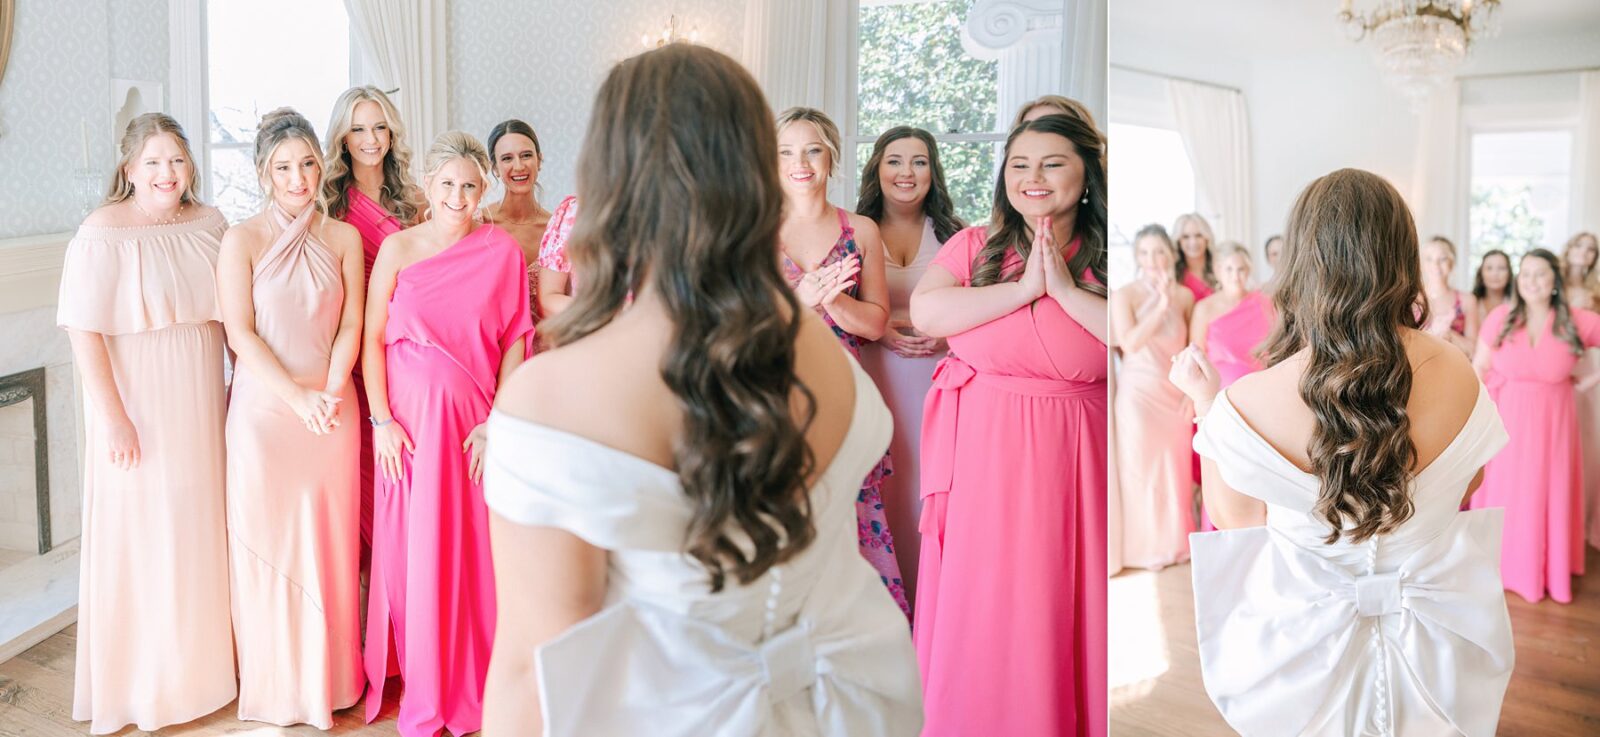 bridesmaid first look, bridesmaids seeing bride for the first time, large wedding party, twelve bridesmaids, pink bridesmaid dresses, wedding at Woodbine mansion in round rock texas, wedding photos by Tara Lyons Photography, planning by The event shop